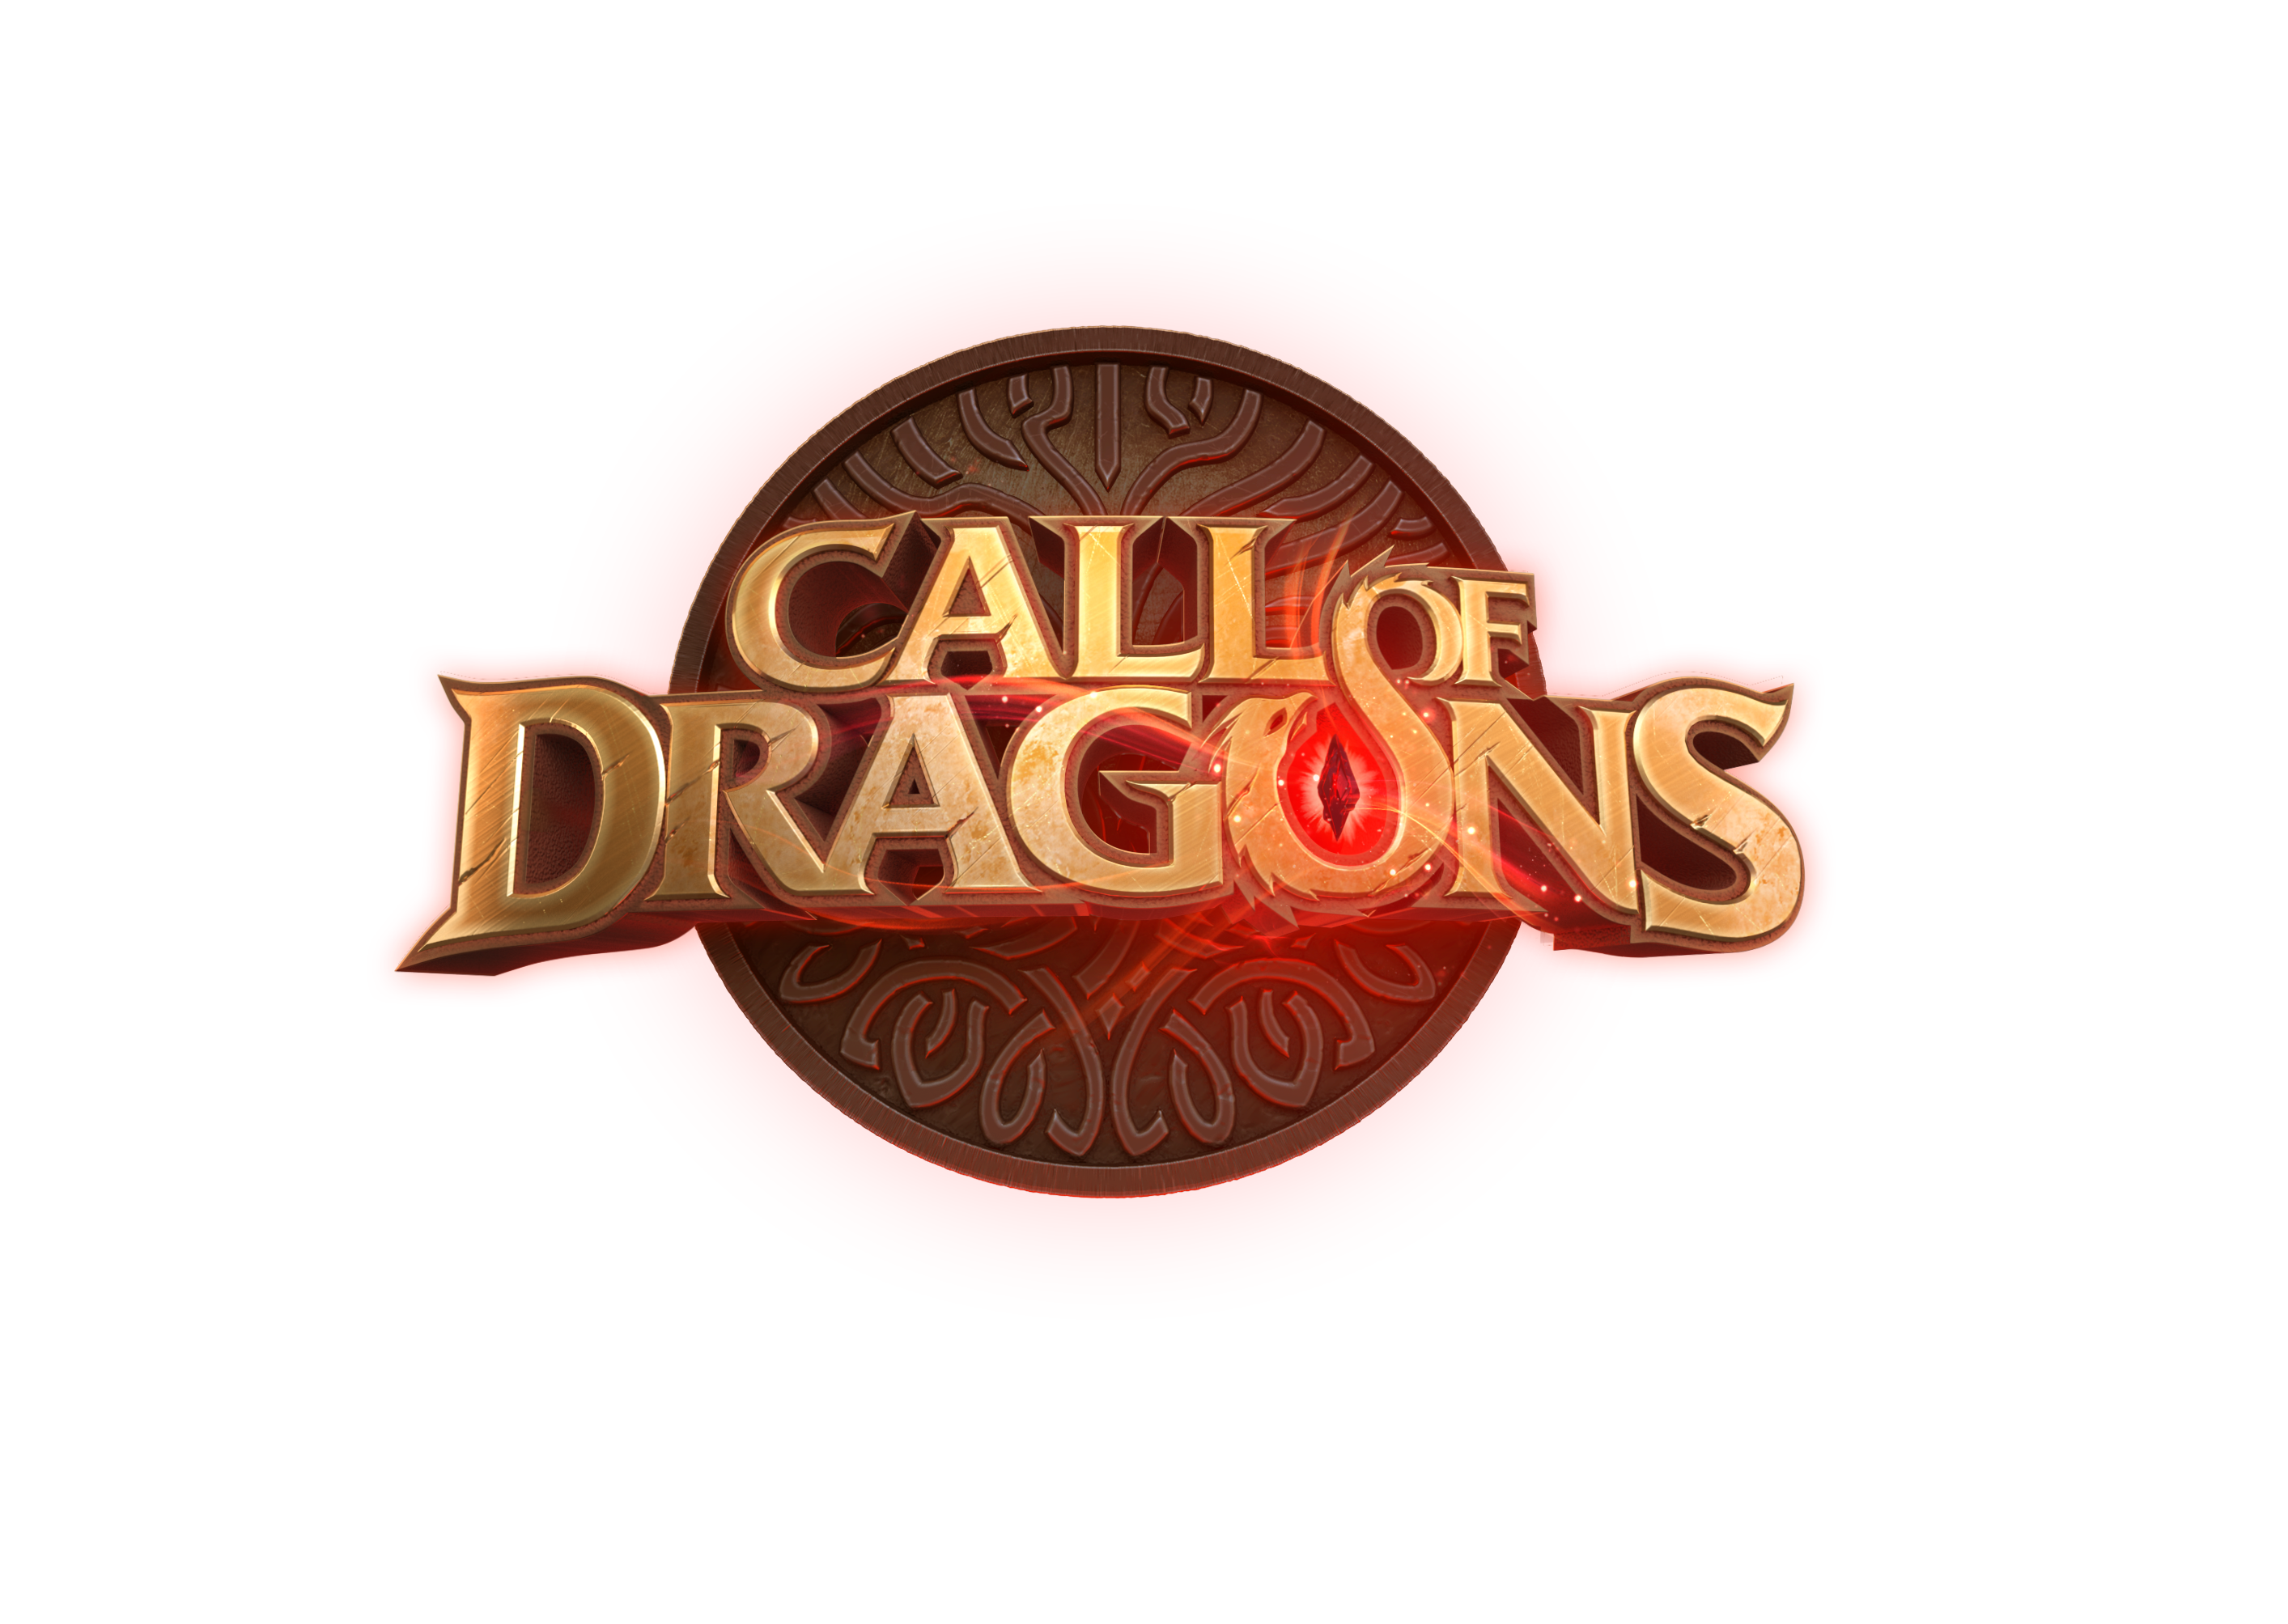 High Fantasy Lore and Strategy Combat Converge in Call of Dragons, a New  MMOSLG from Farlight Games; Now Accepting Pre-Registration on Android -  ÜberStrategist PR & Marketing Agency